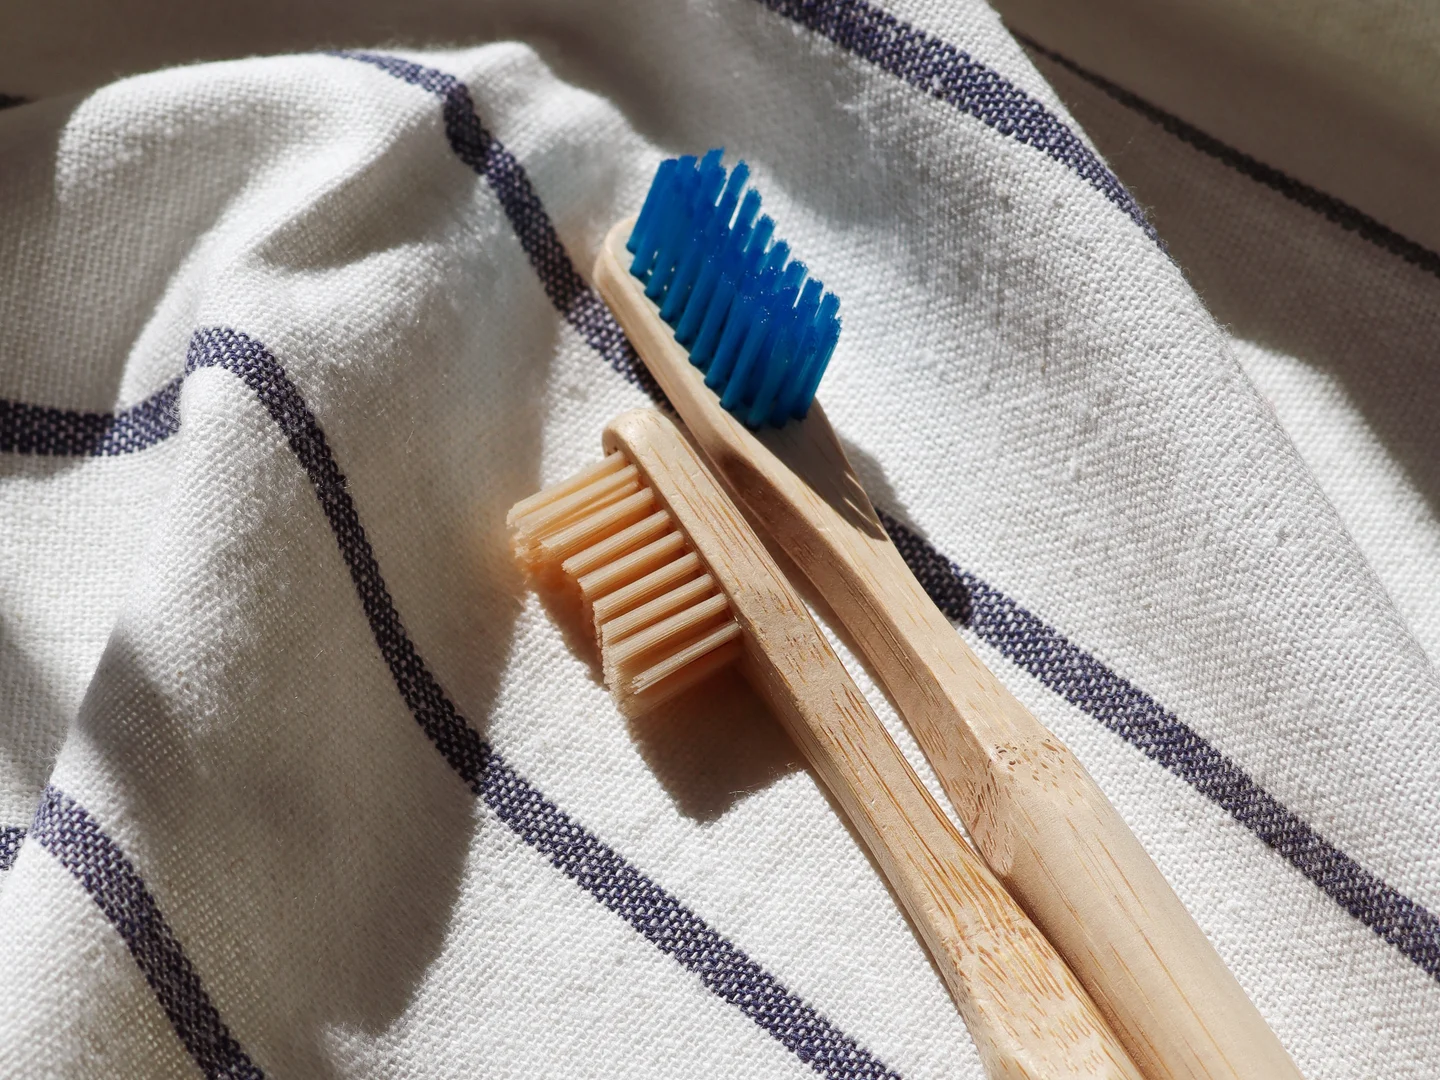 To remove mould from your roller blinds, mould should be cleaned using an old toothbrush